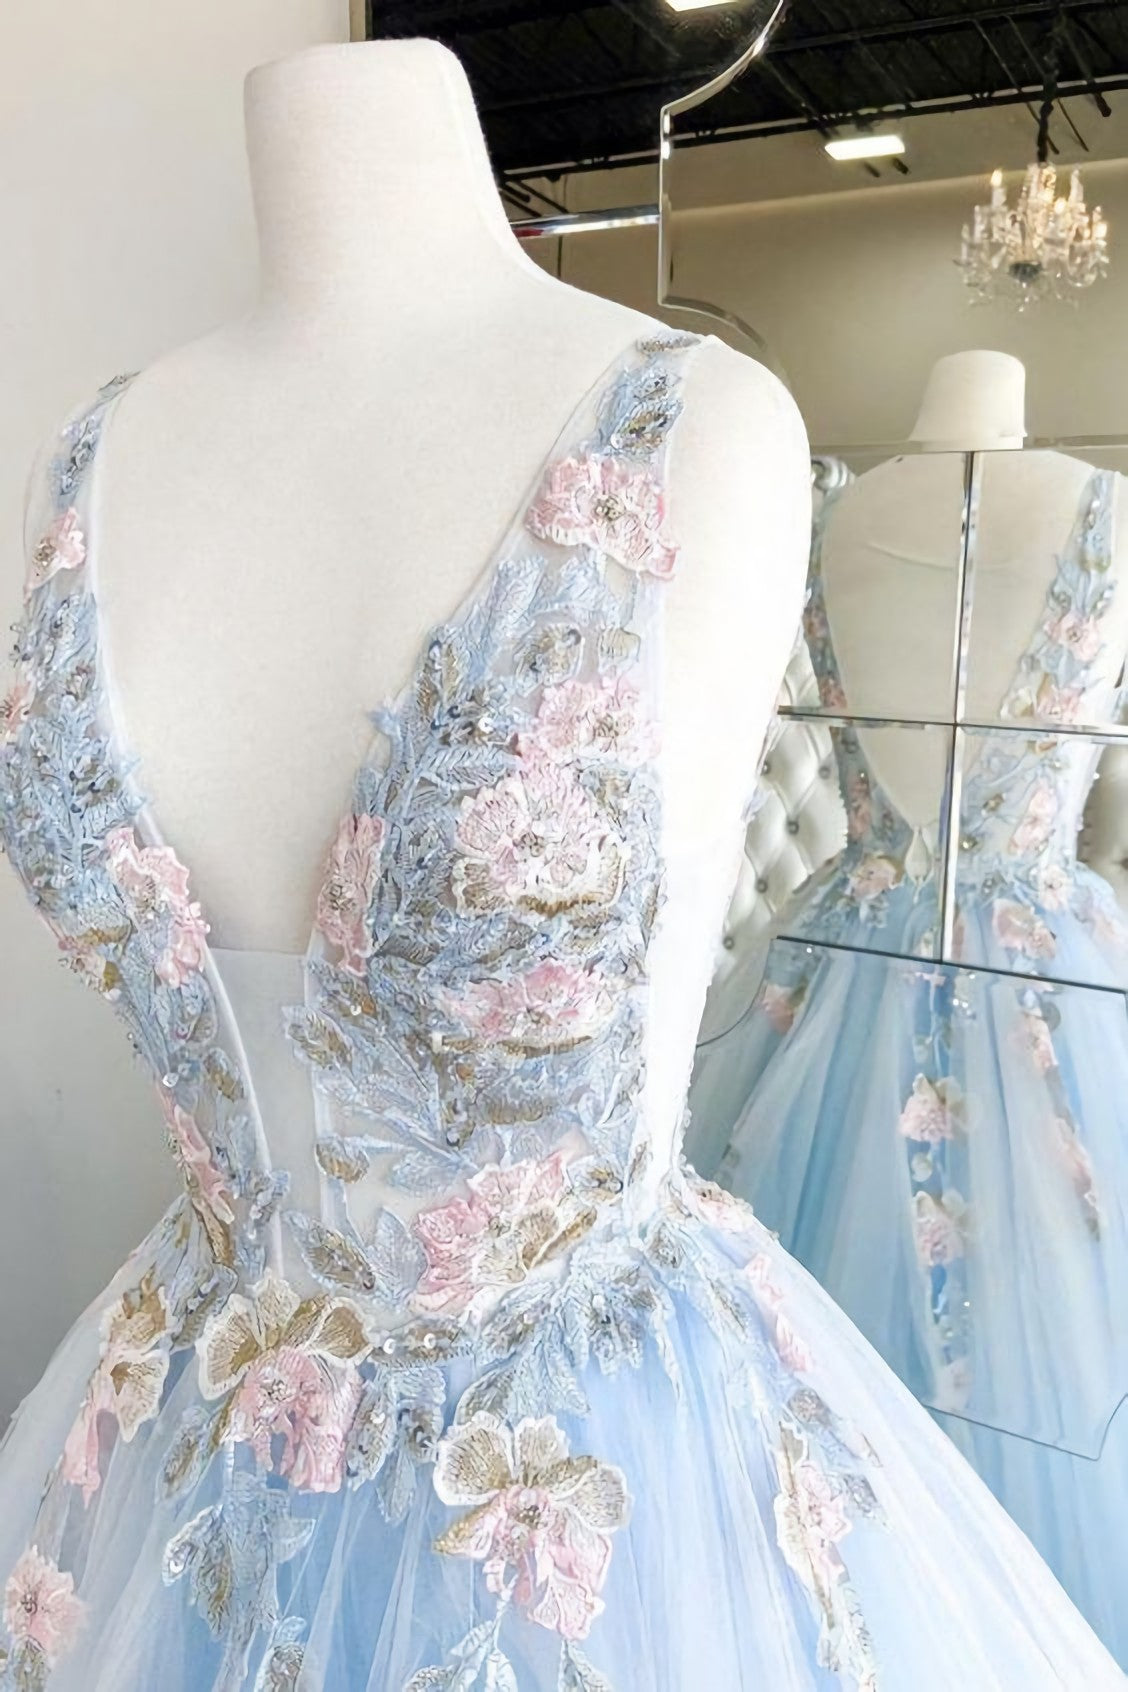 Prom Dress On Sale, Baby Blue Prom Dress, With Embroidery